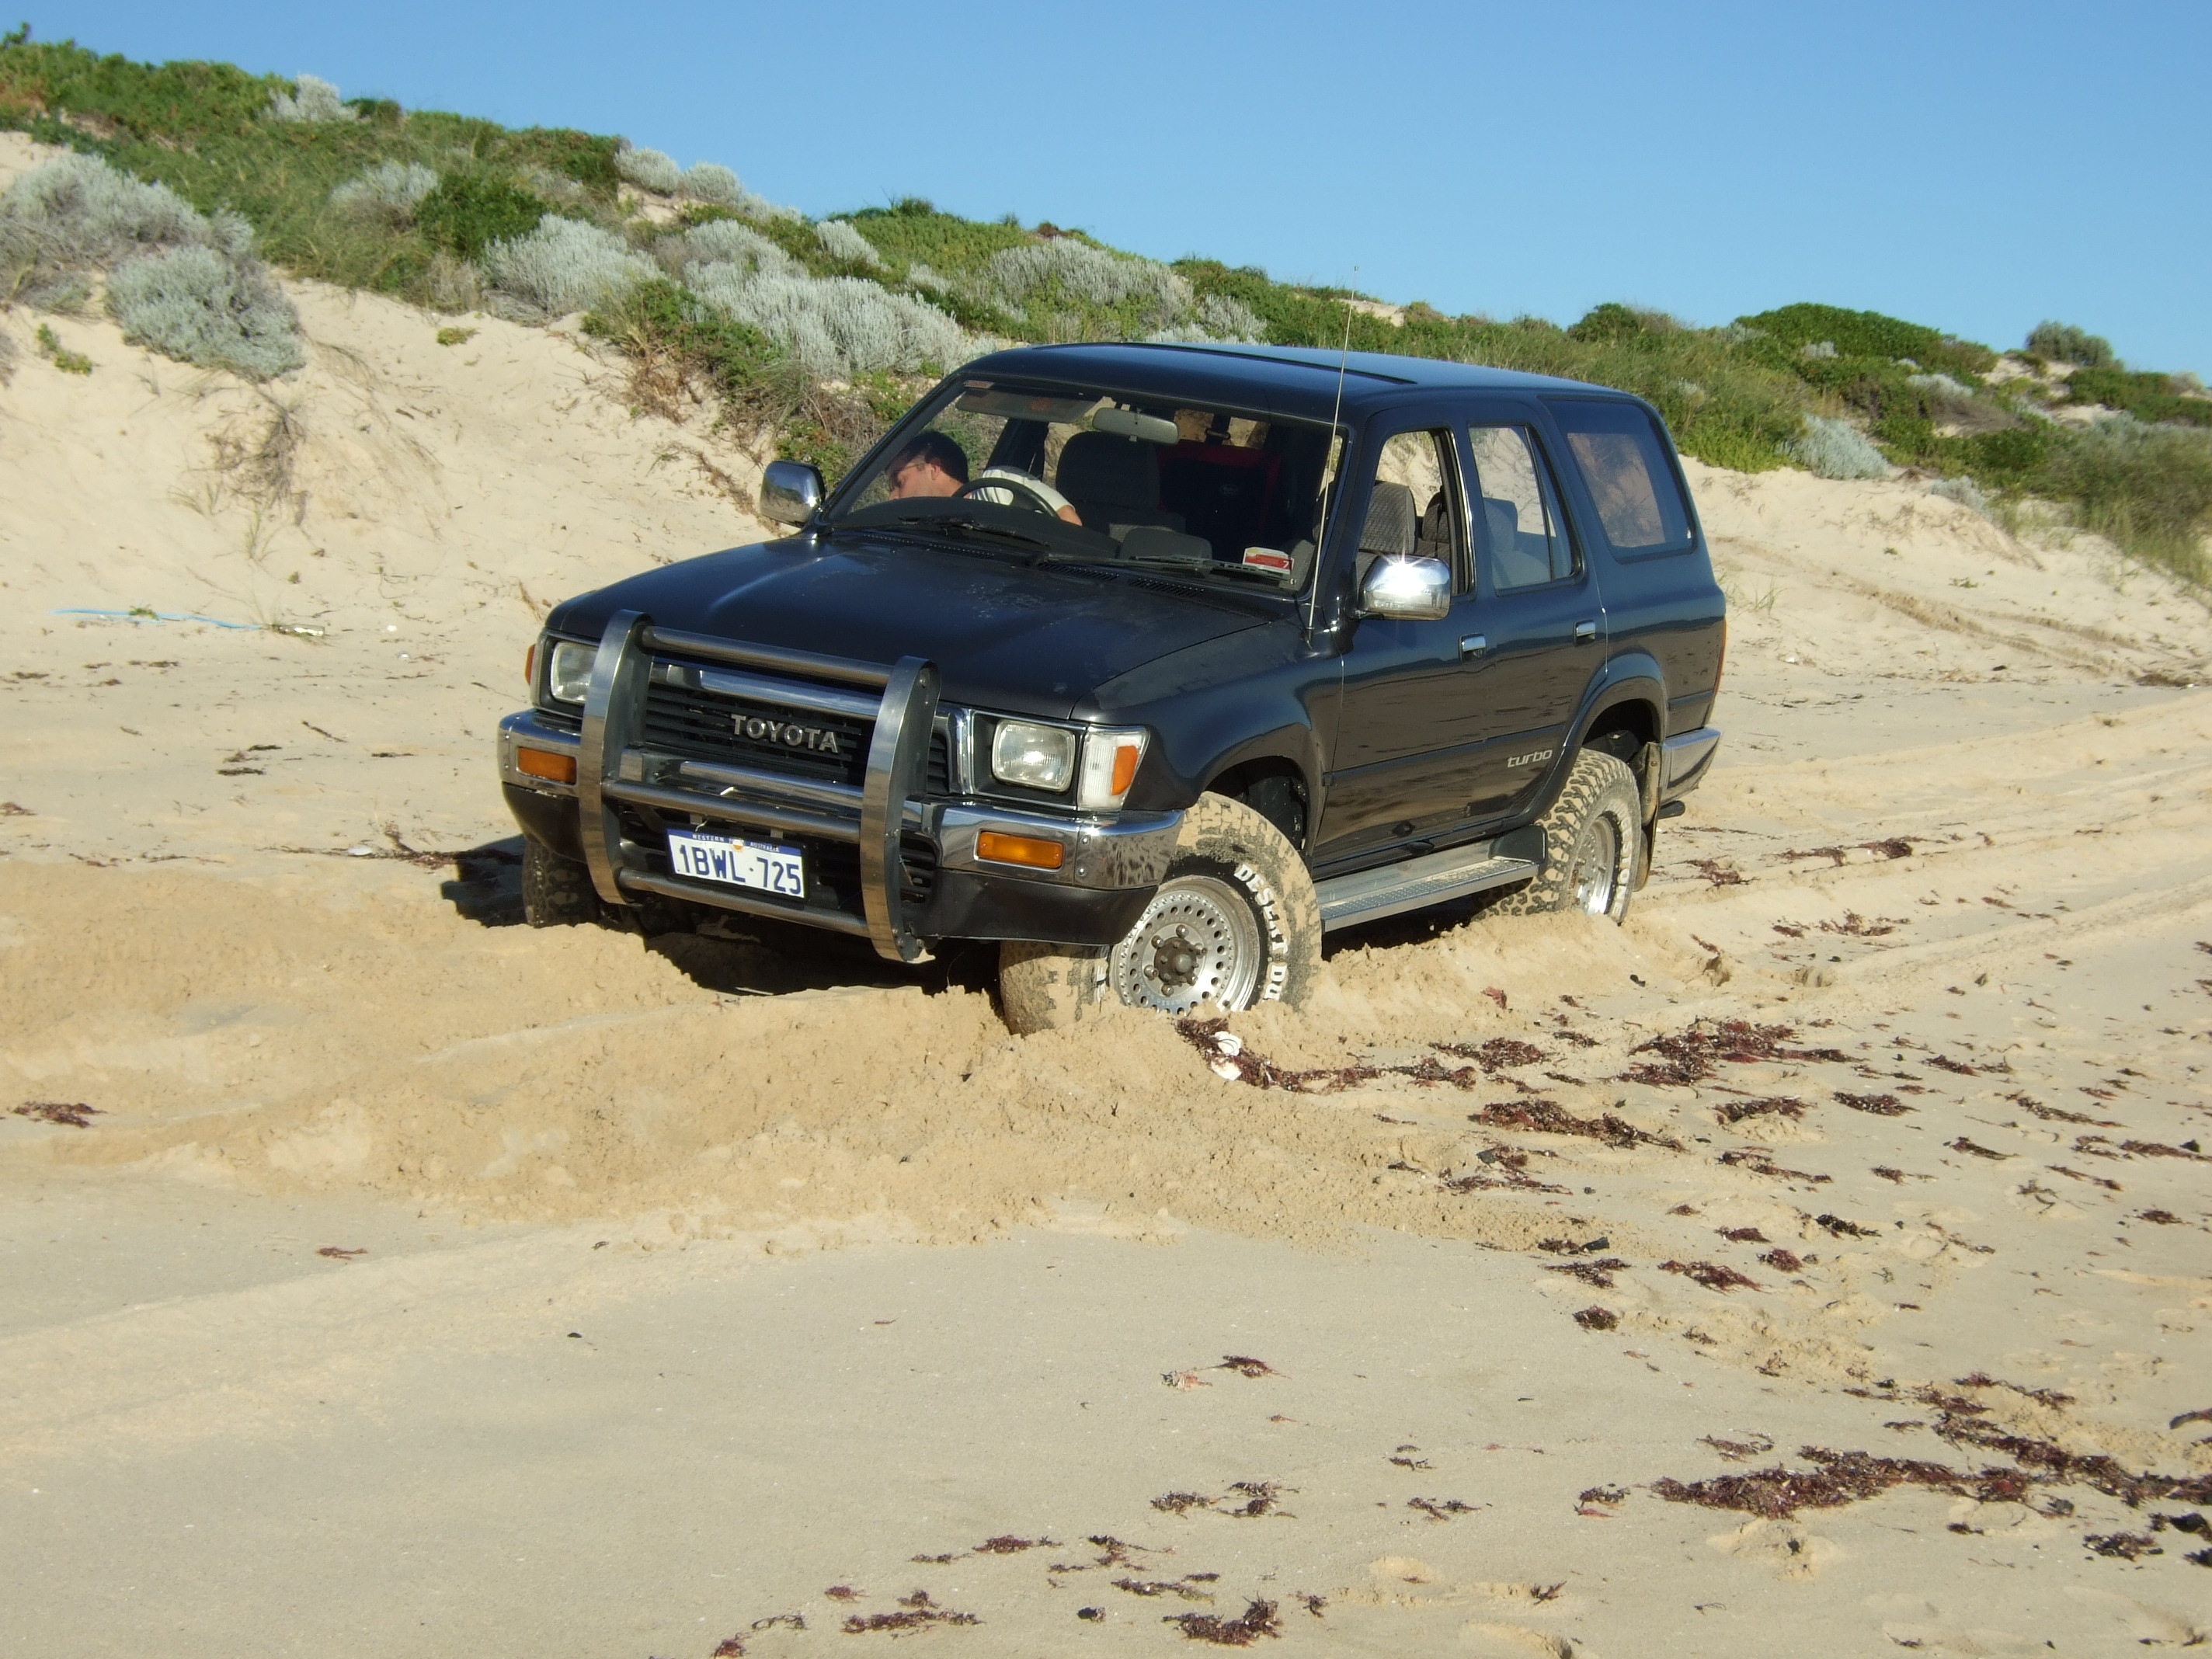 Four Wheel Driving Perth - Page 3 - British Expats